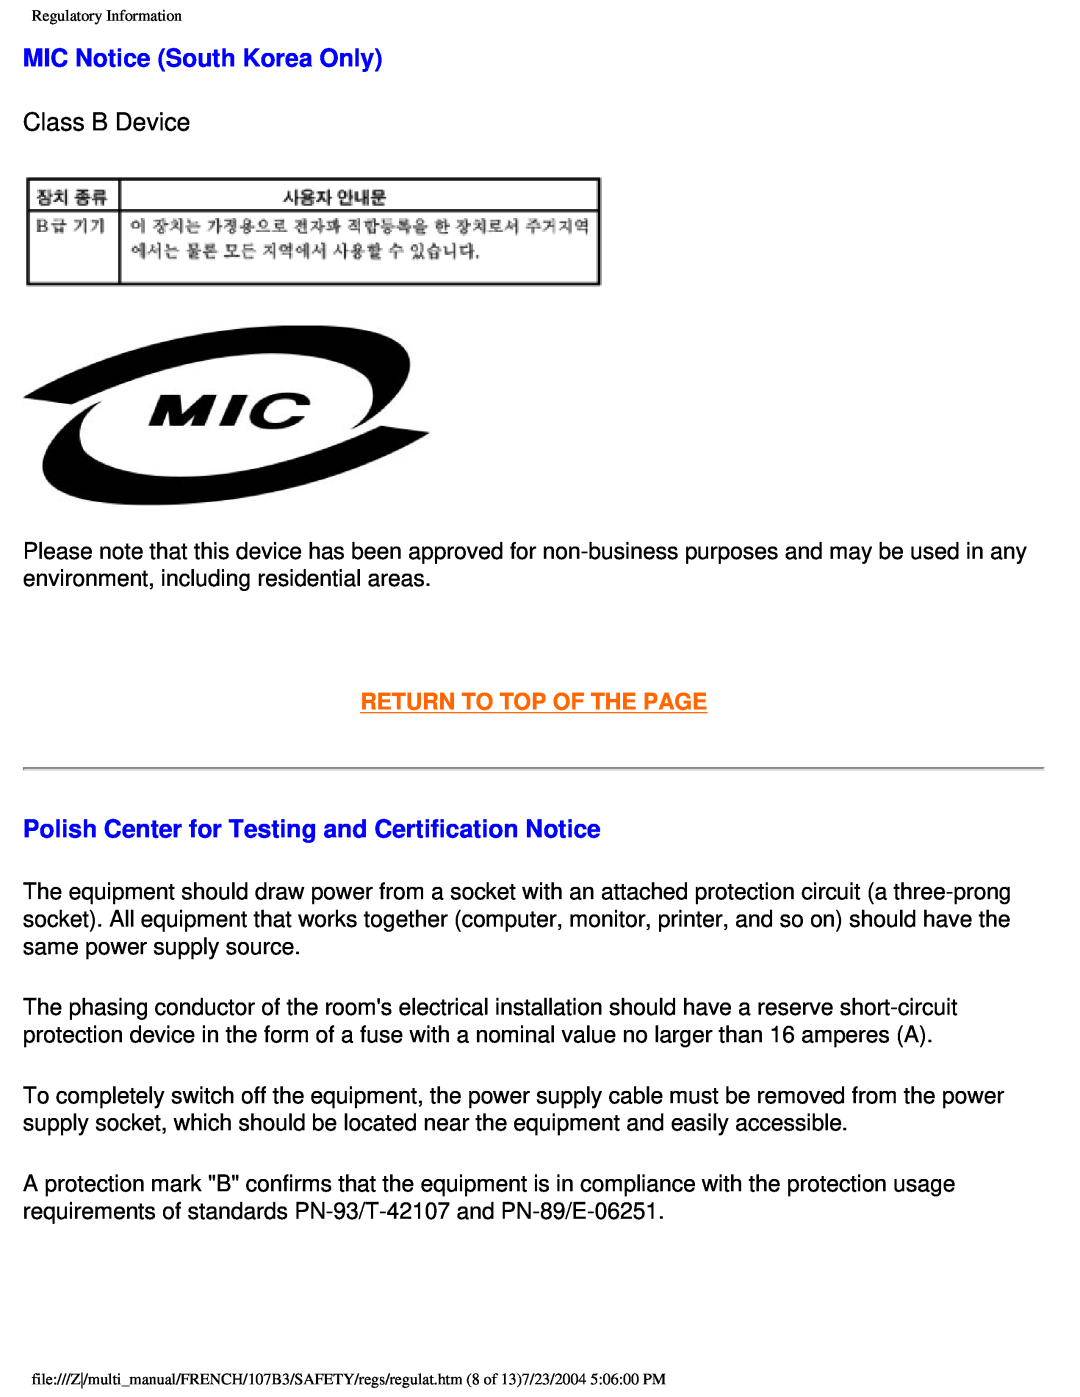 Philips 107B3 user manual MIC Notice South Korea Only, Class B Device, Return To Top Of The Page 